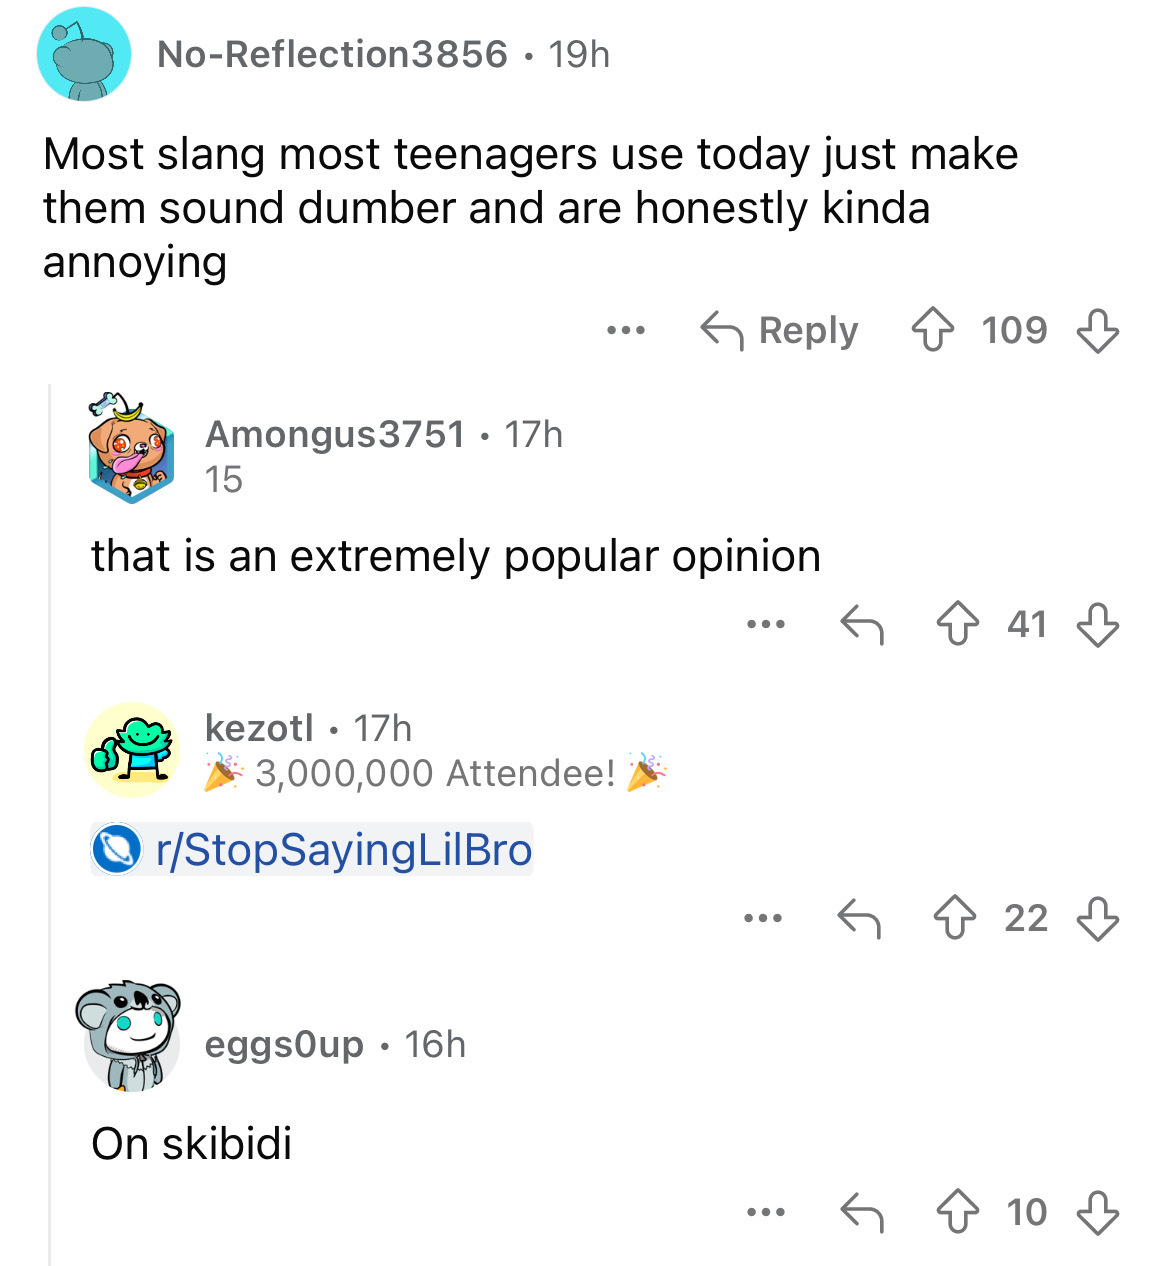 screenshot - NoReflection3856 19h Most slang most teenagers use today just make them sound dumber and are honestly kinda annoying Amongus3751 17h 15 ... 109 that is an extremely popular opinion kezotl 17h 3,000,000 Attendee! rStopSayingLilBro eggsOup 16h 